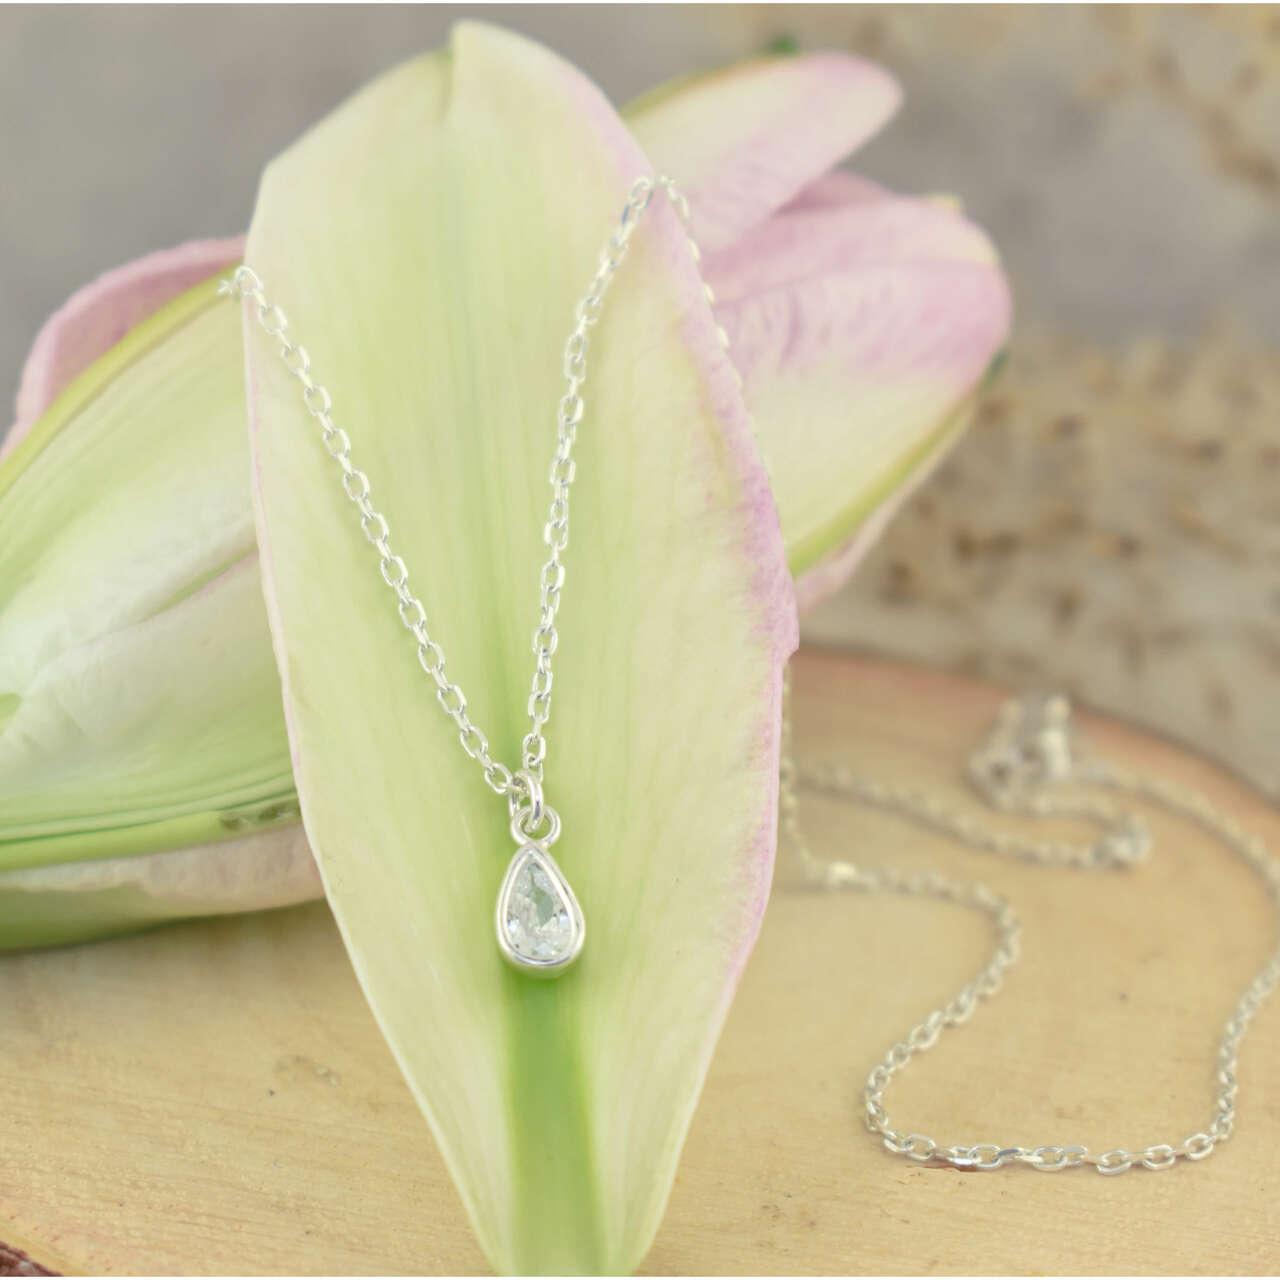 .925 sterling silver necklace with teardrop shaped cz